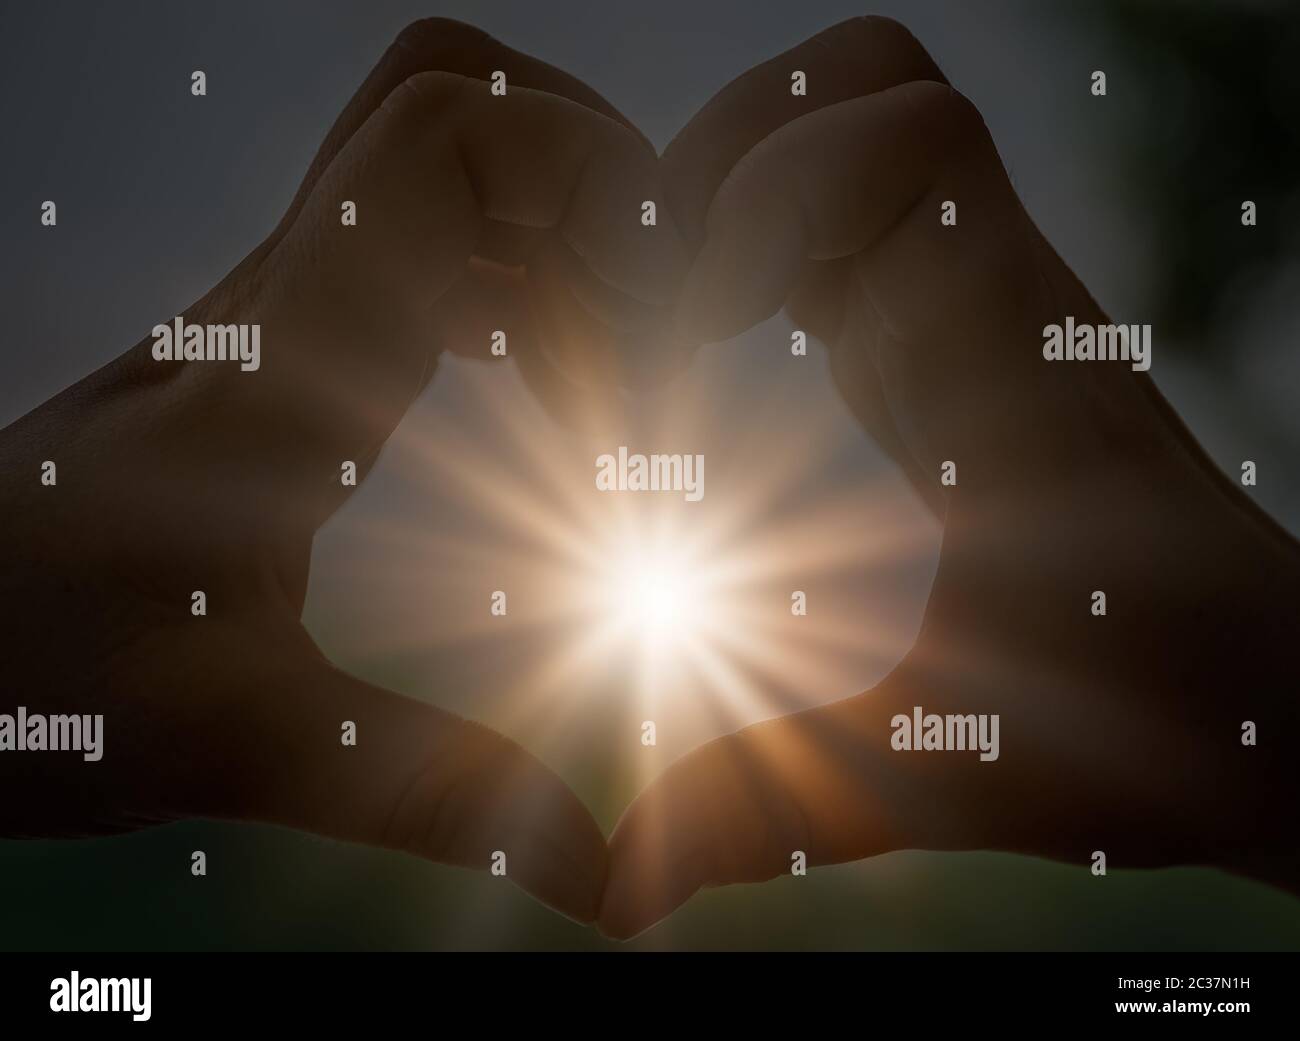 Womans hands catching sunlight sunrays while making heart shape Stock Photo